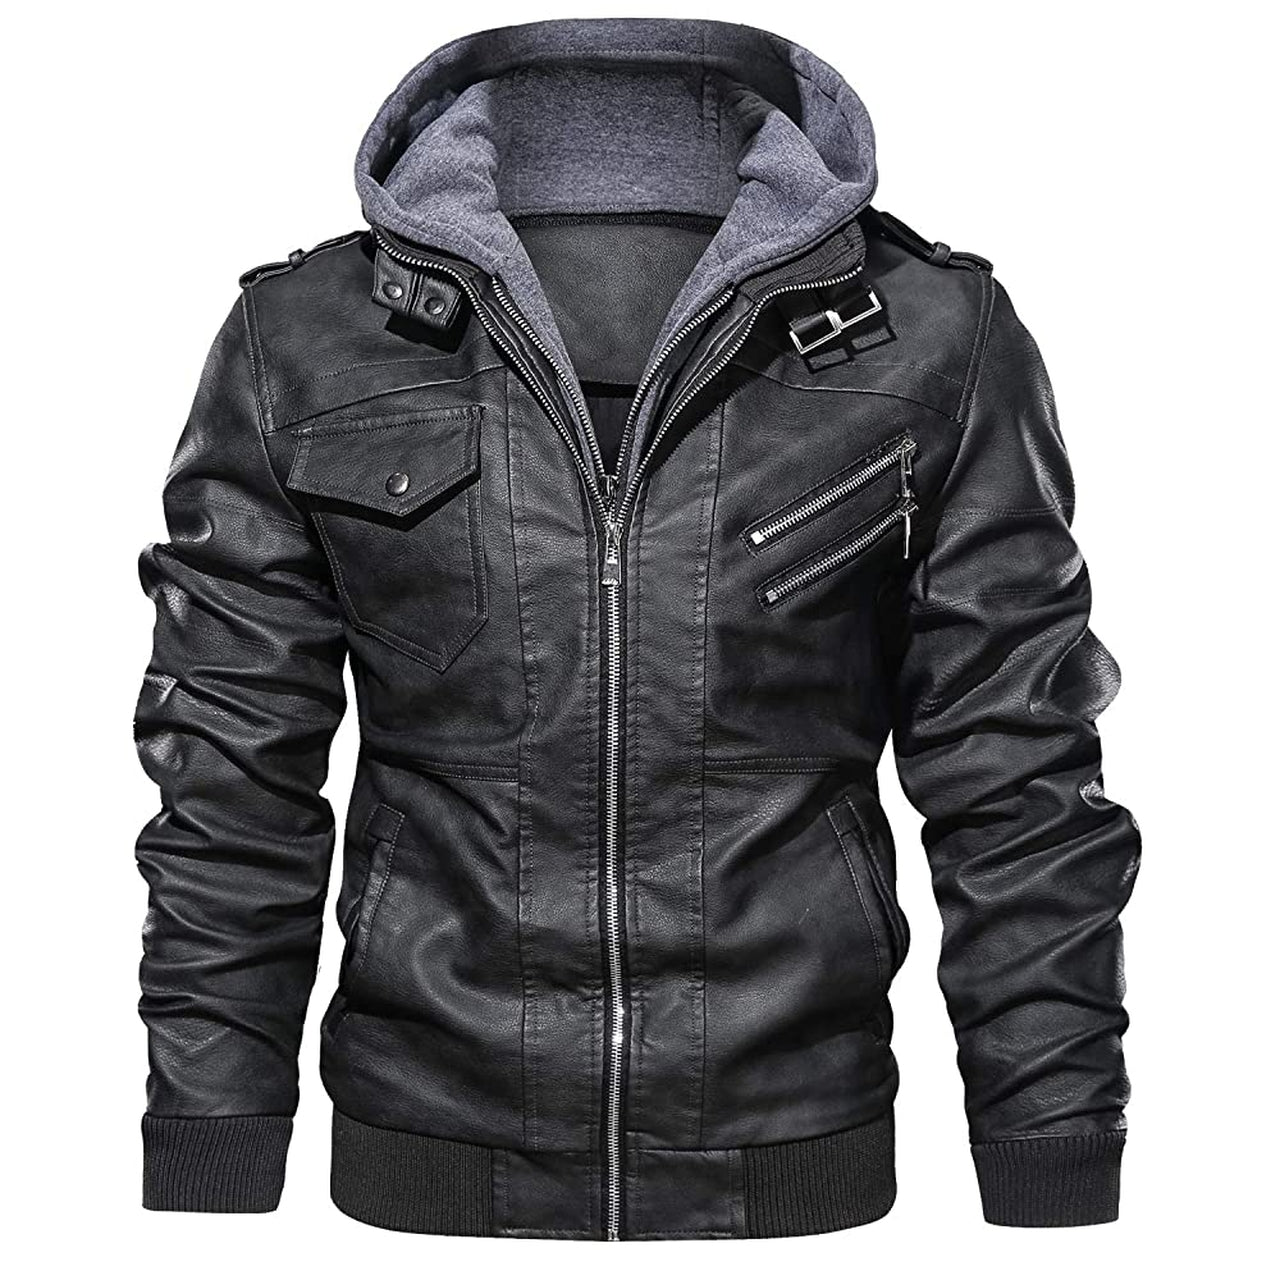 Men Leather Jacket With Removable Hood with Zipper Pockets